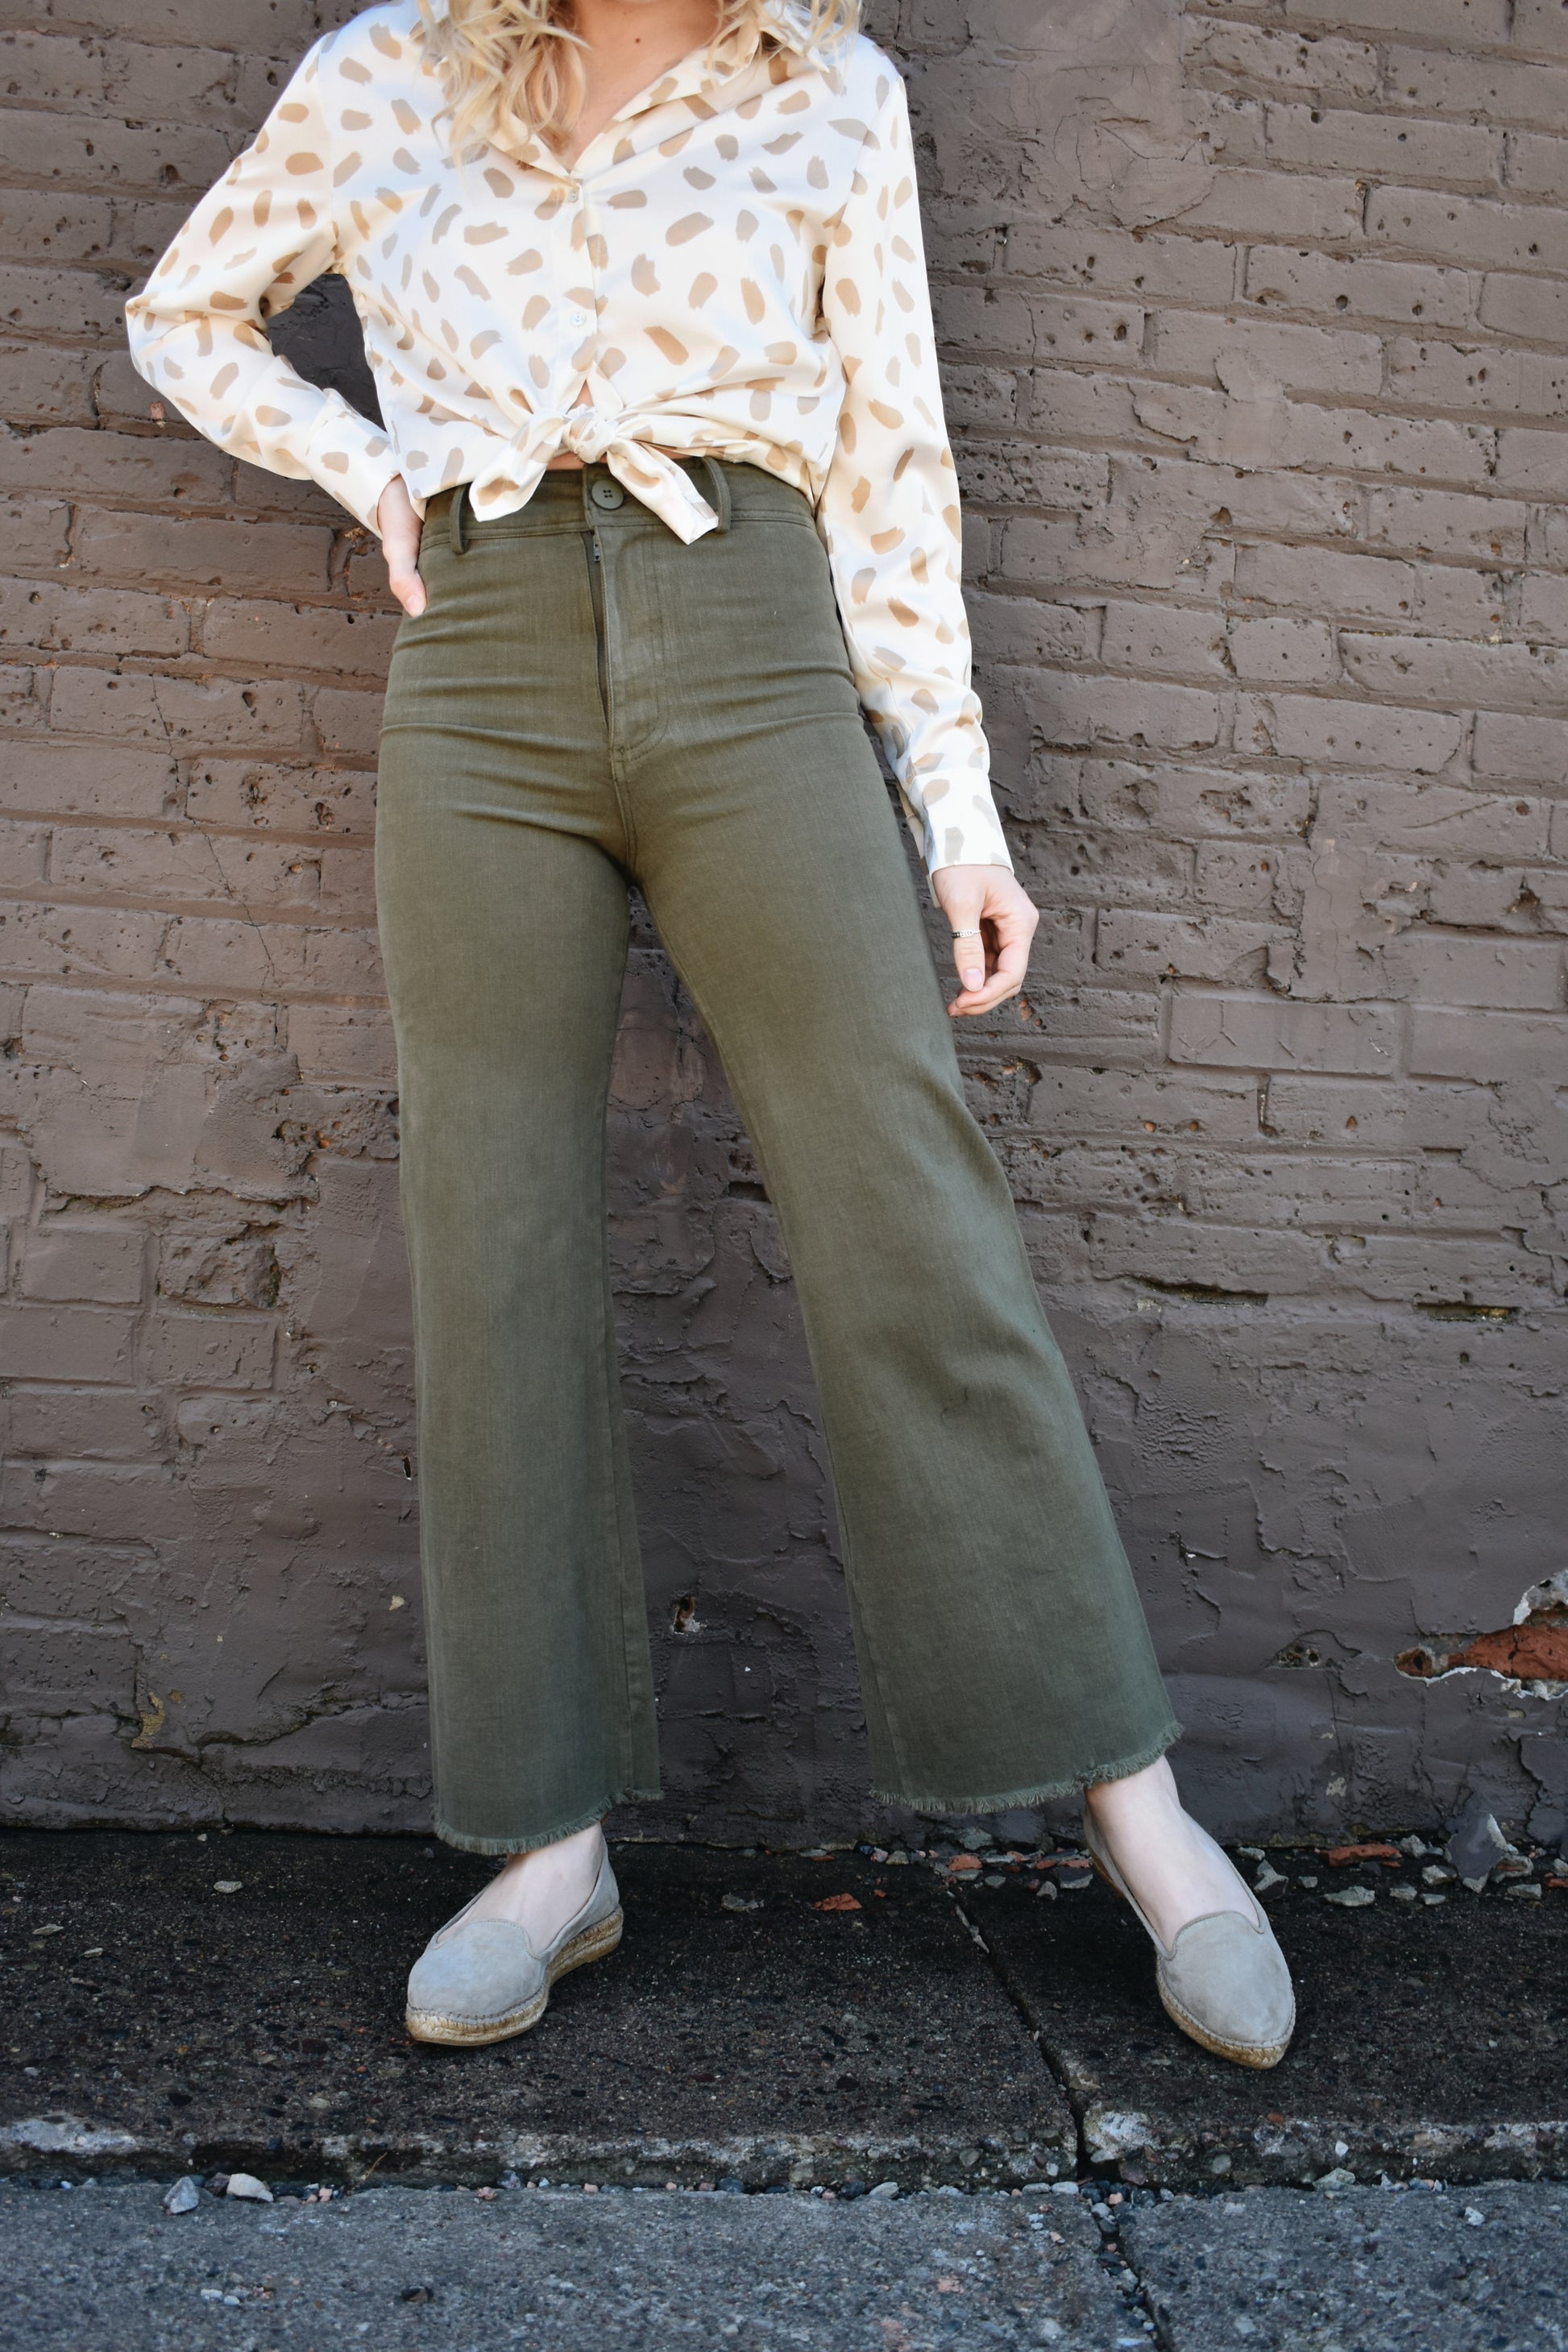 High waisted olive colored denim pants. Wide leg, raw hem, back pockets, slightly cropped. Stretch denim with belt loops.The brand is miss love.